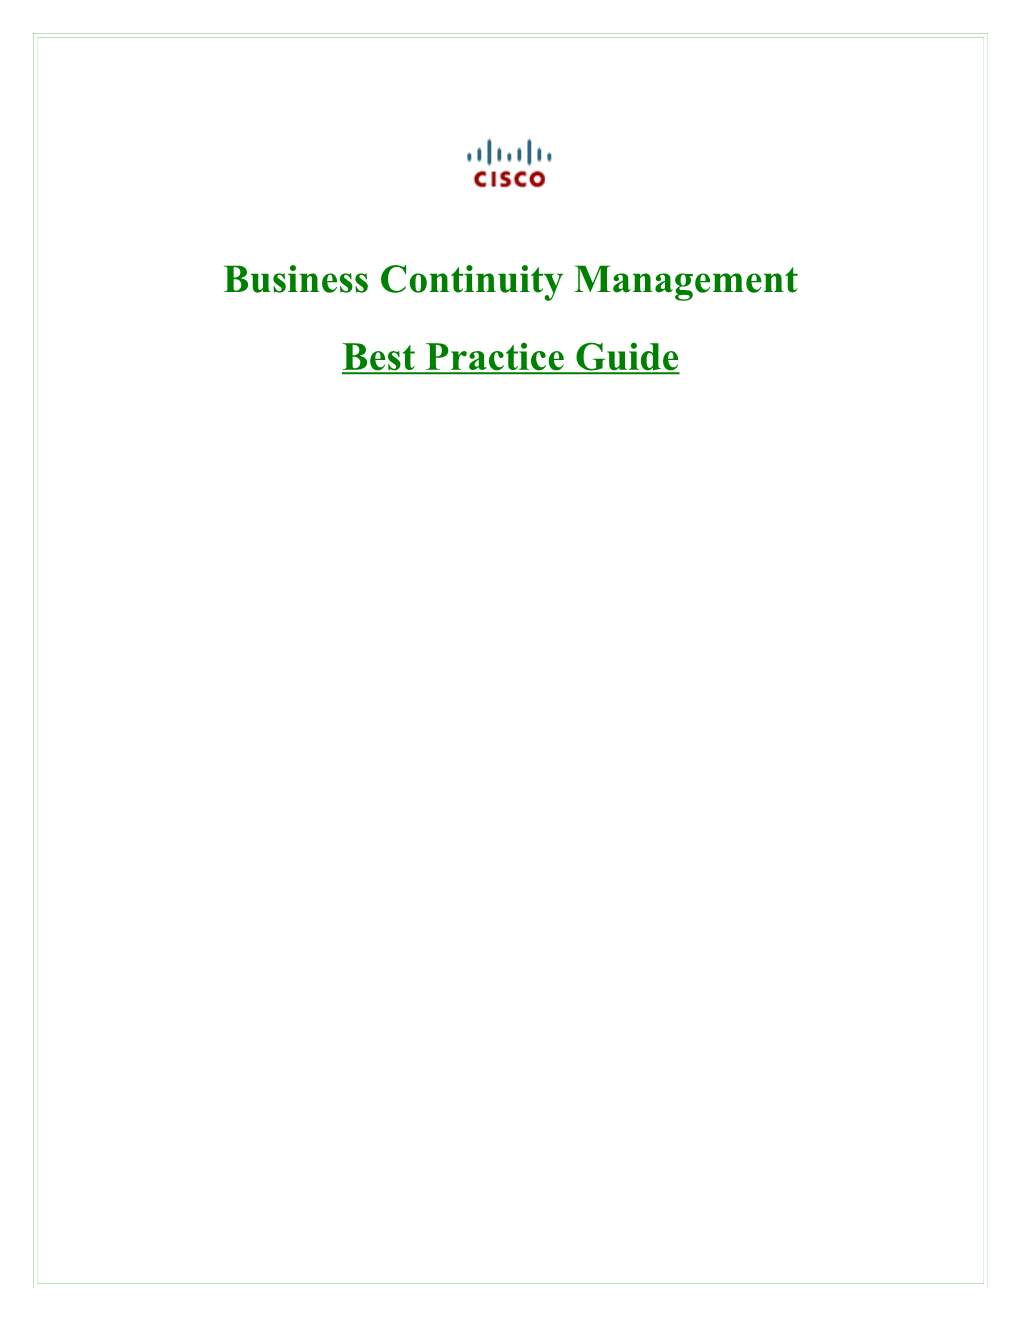 BCM Best Practice Guide